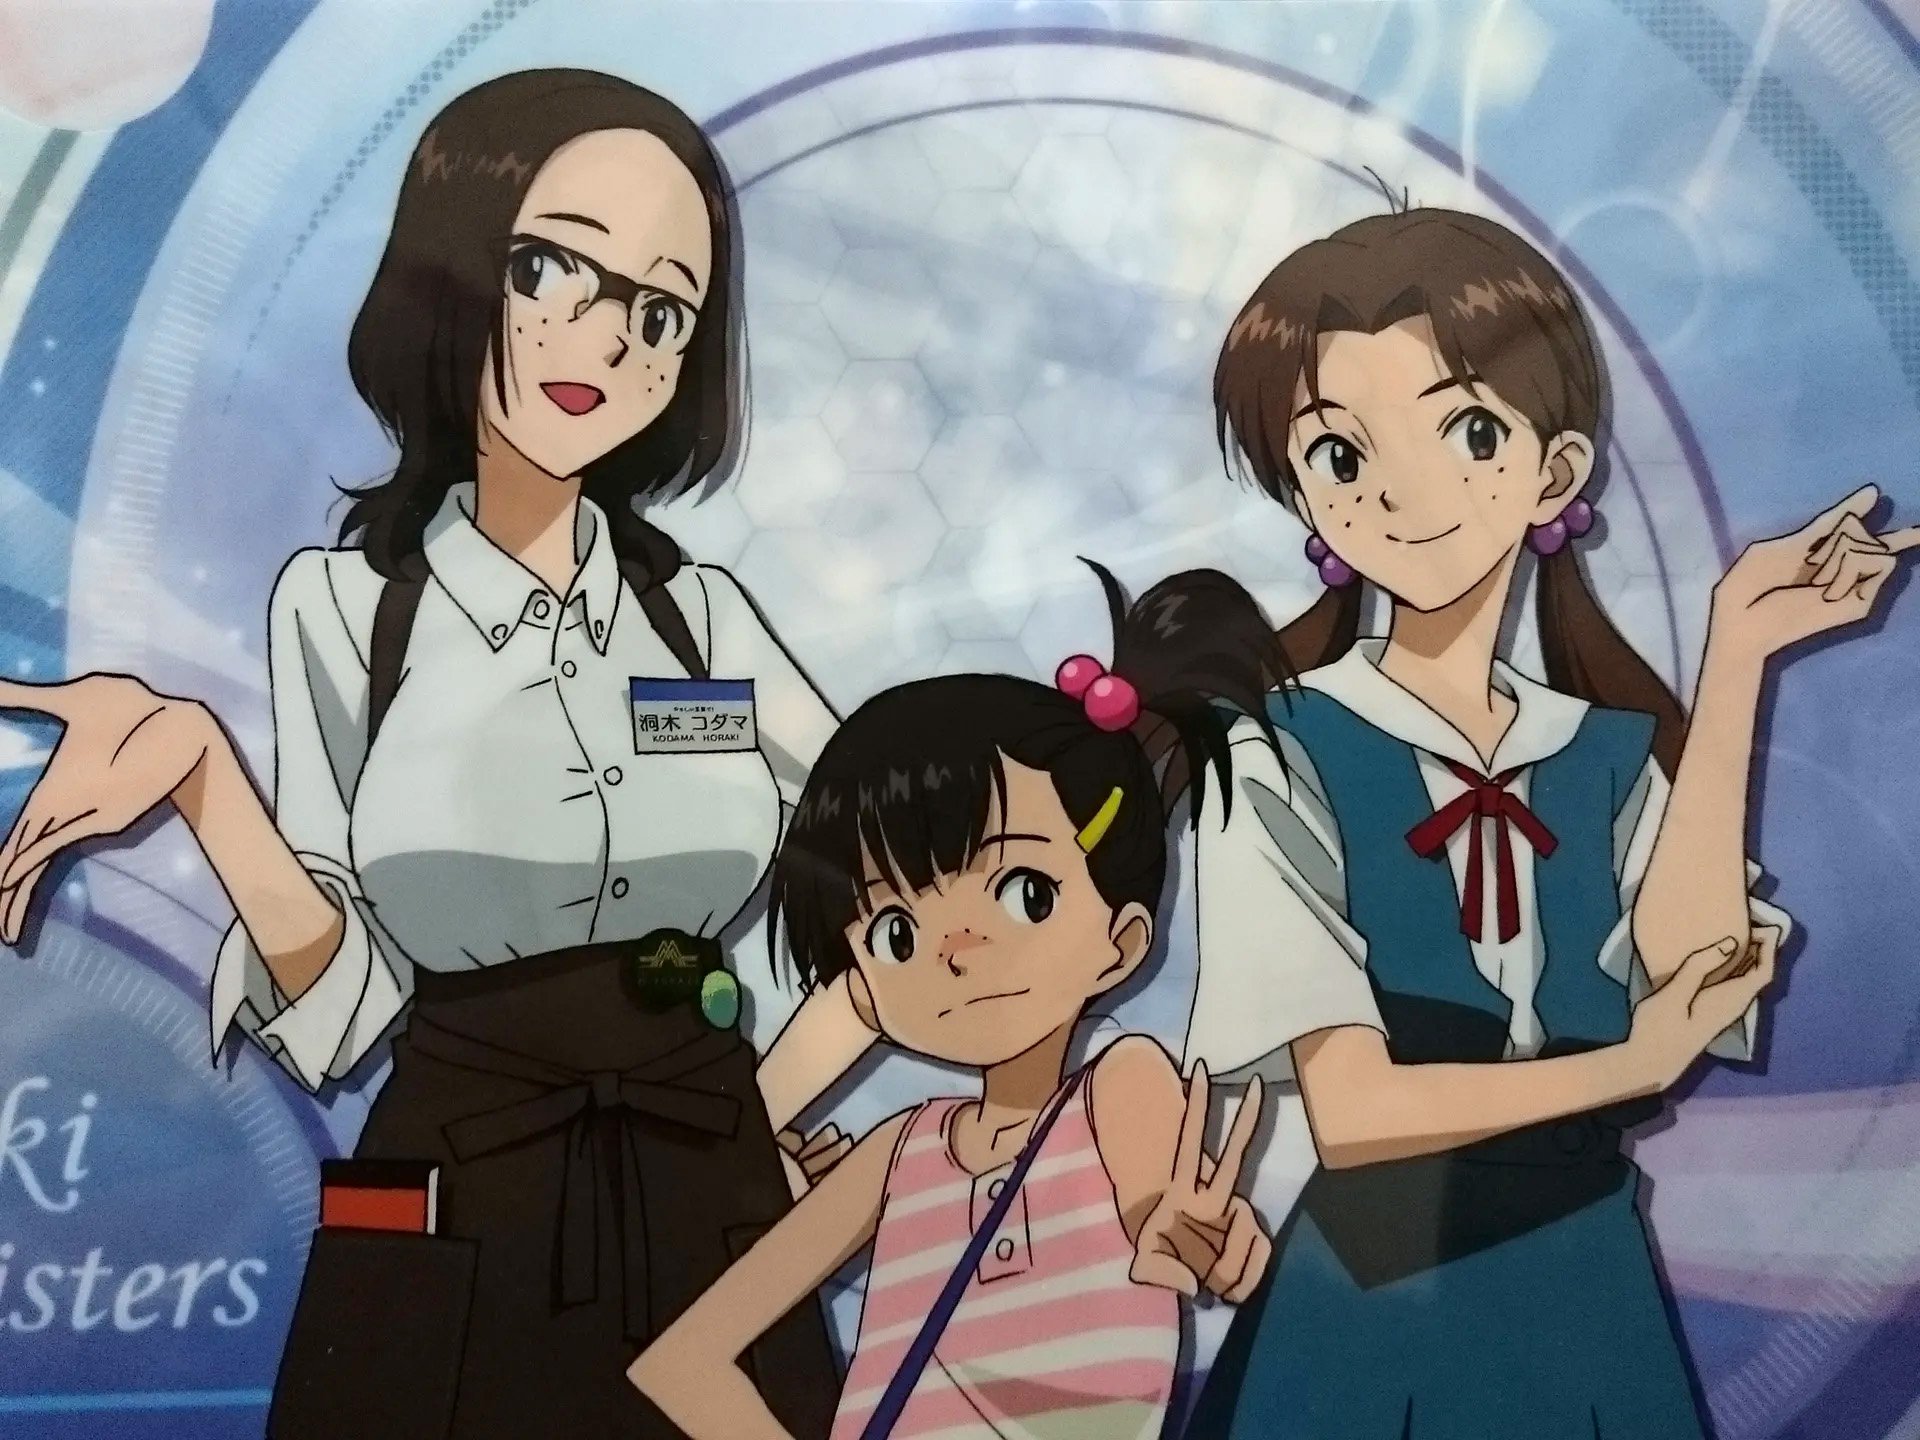 Eva Monkey Is Spoiler Free Today Is Nationalmiddlechildday So I Thought I Would Point Out That Official Designs For Hikari Horaki S Older Kodama And Younger Nozomi Sisters Do Exist Evangelion